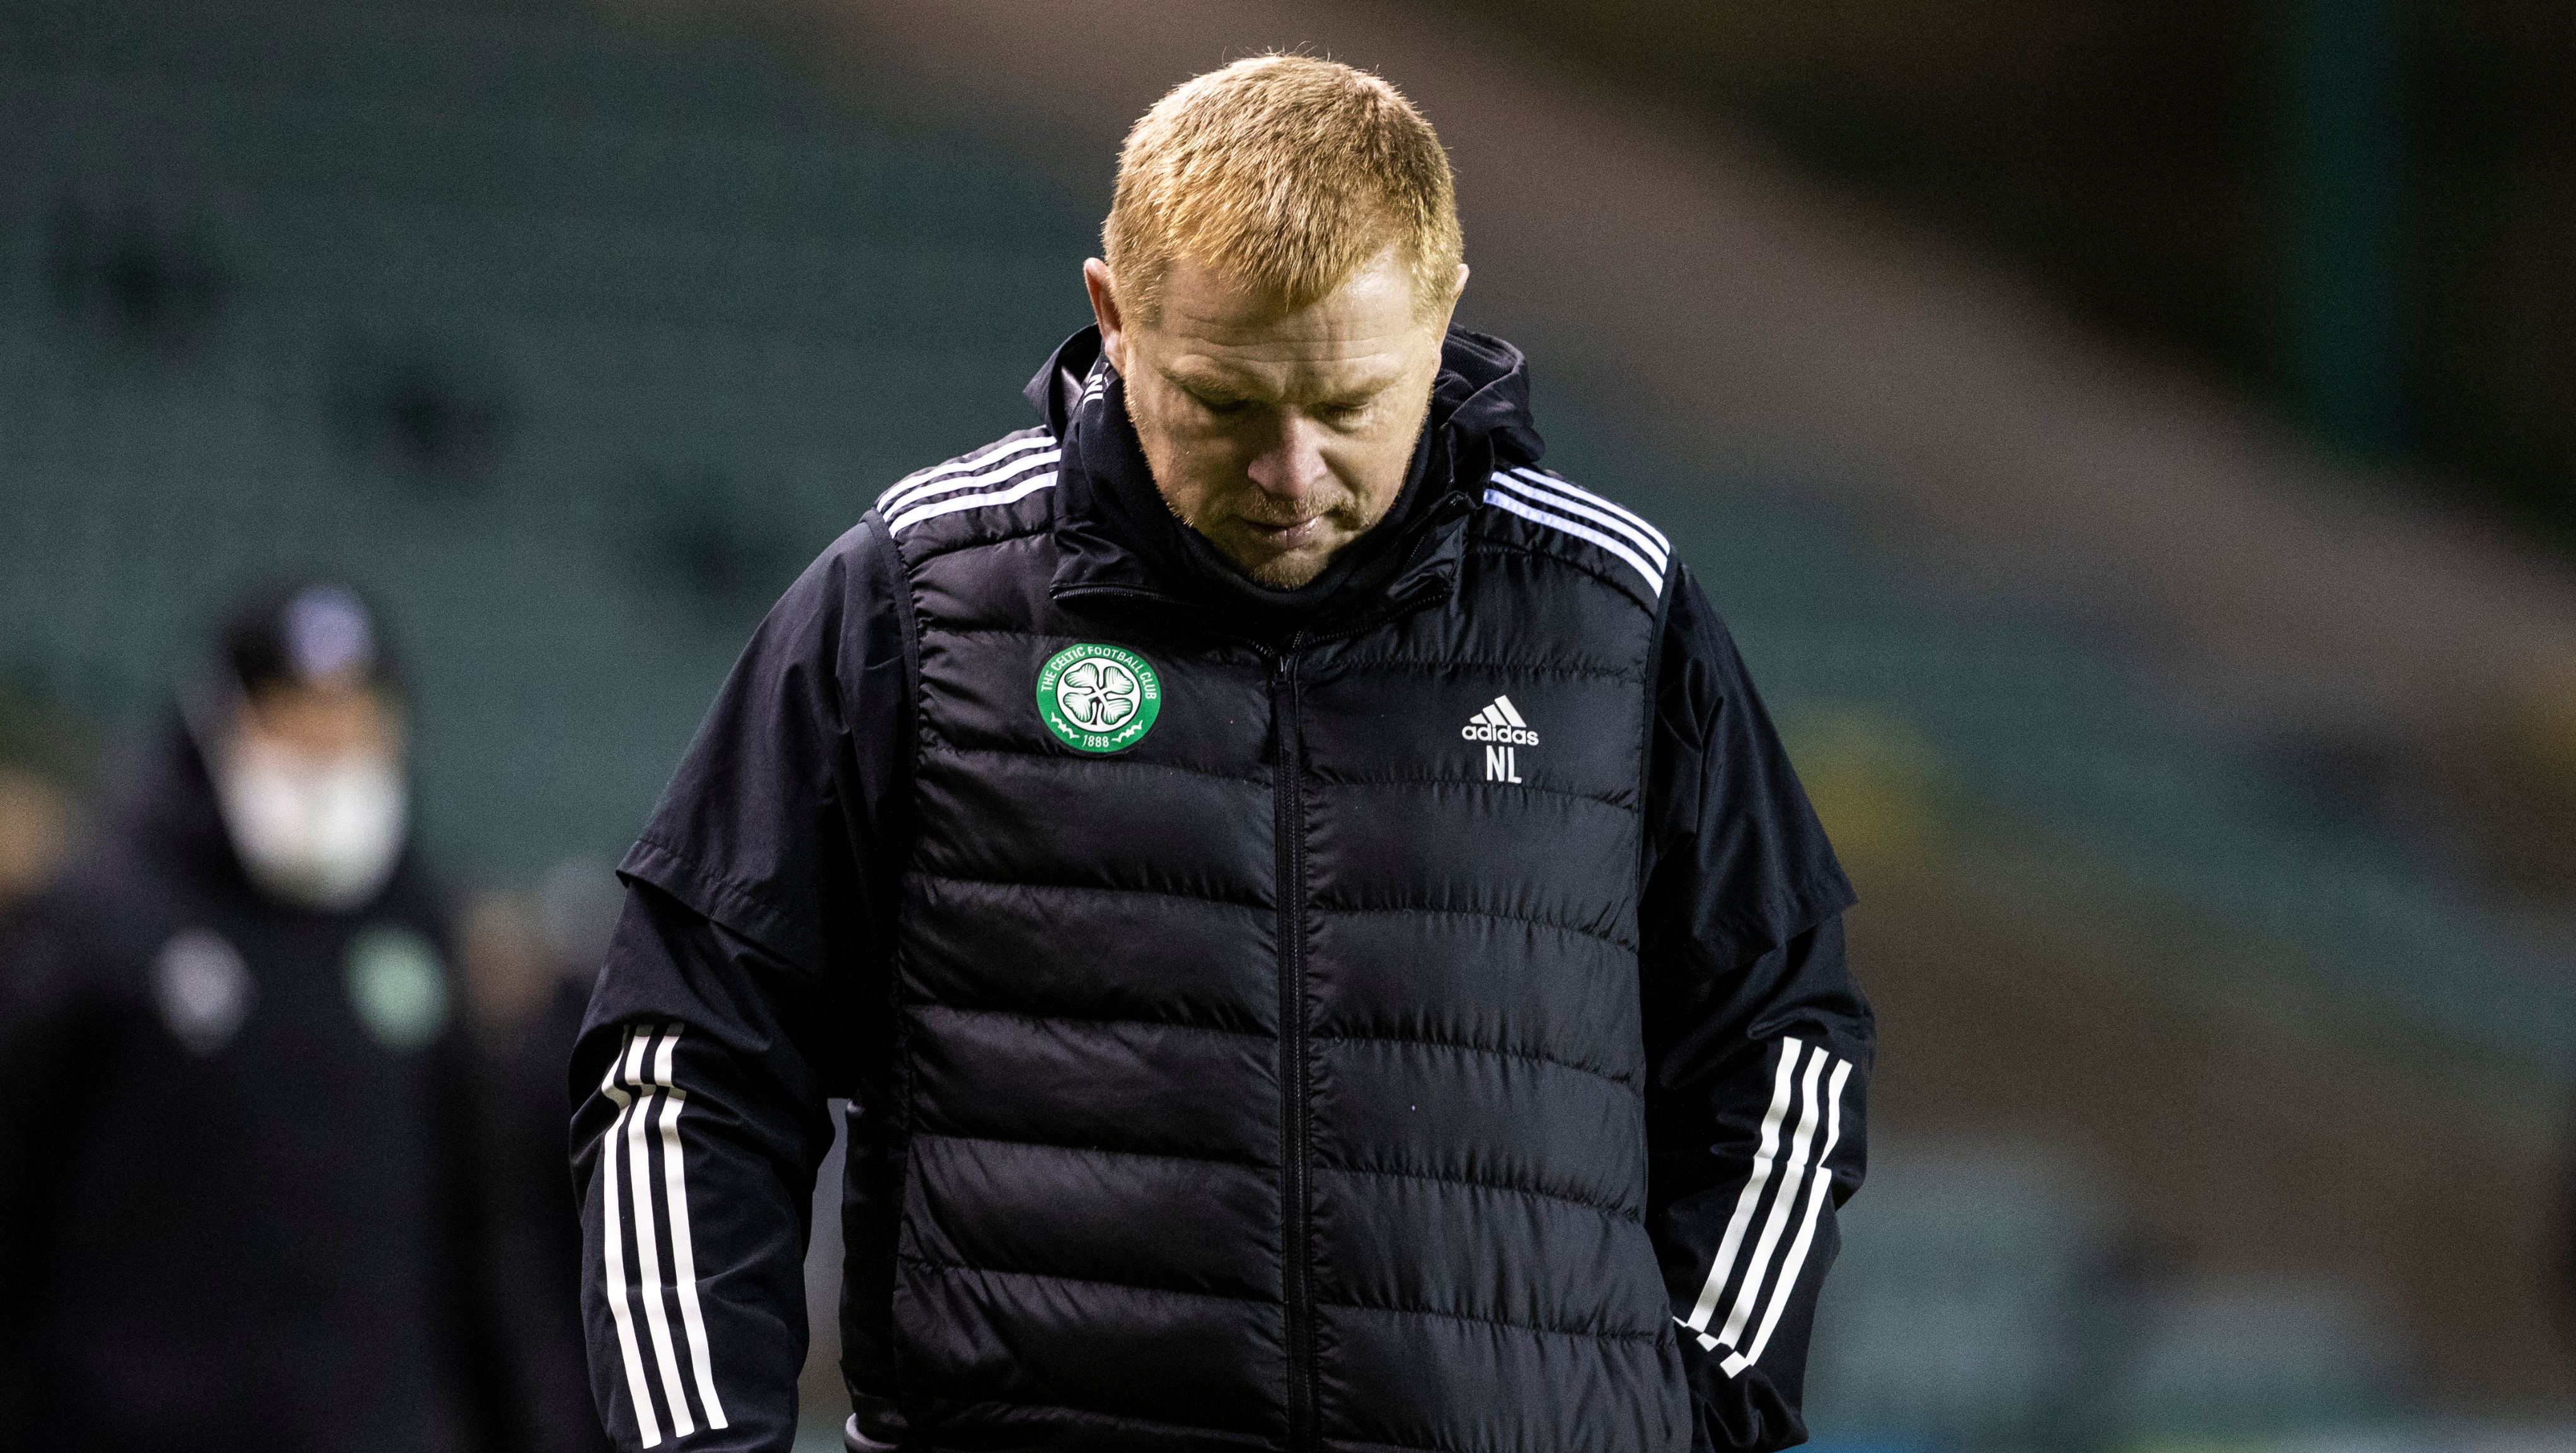 Neil Lennon questioned his team after drawing 2-2 with Hibs.